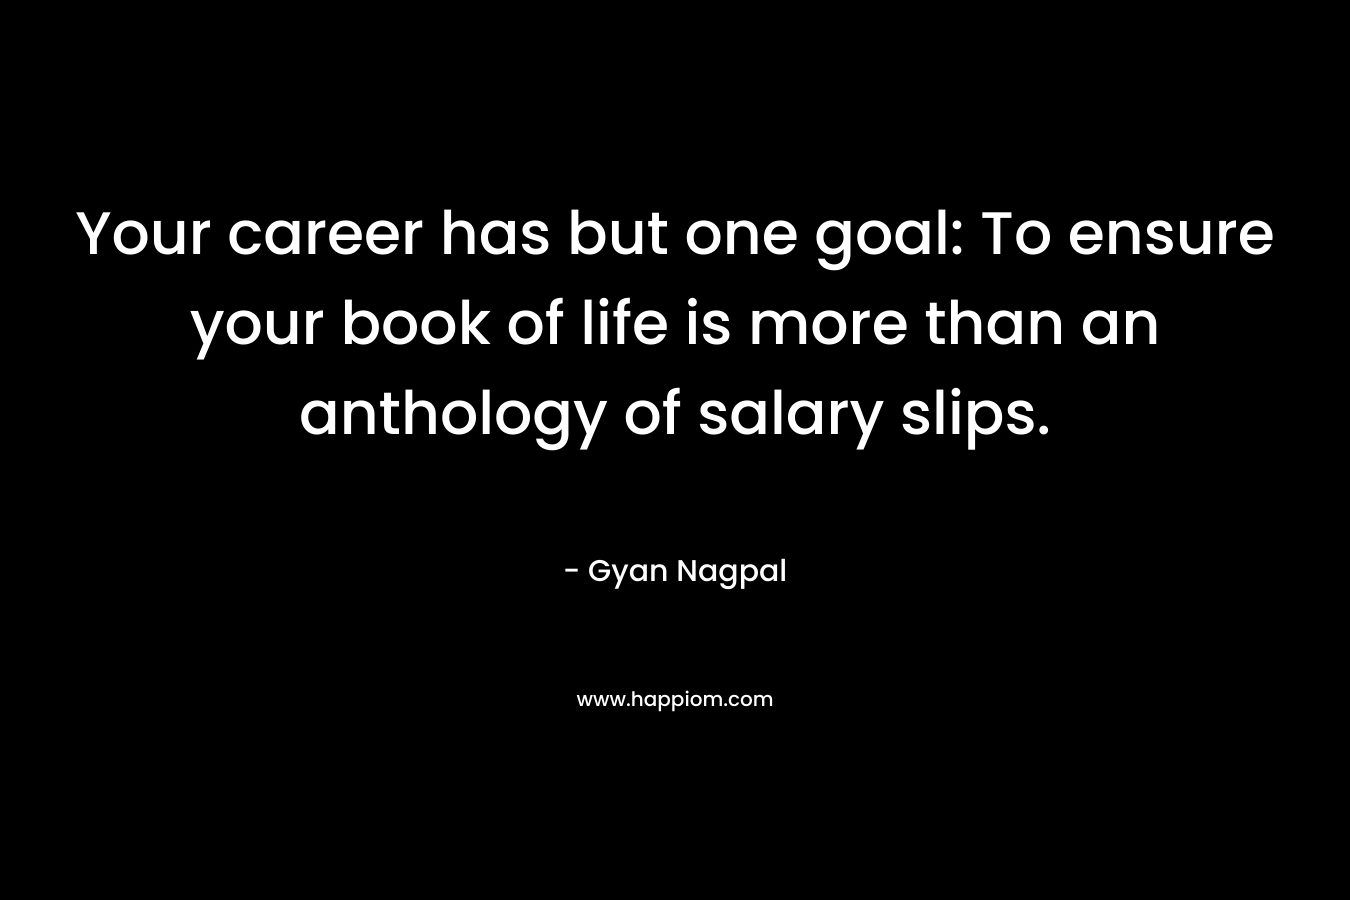 Your career has but one goal: To ensure your book of life is more than an anthology of salary slips.